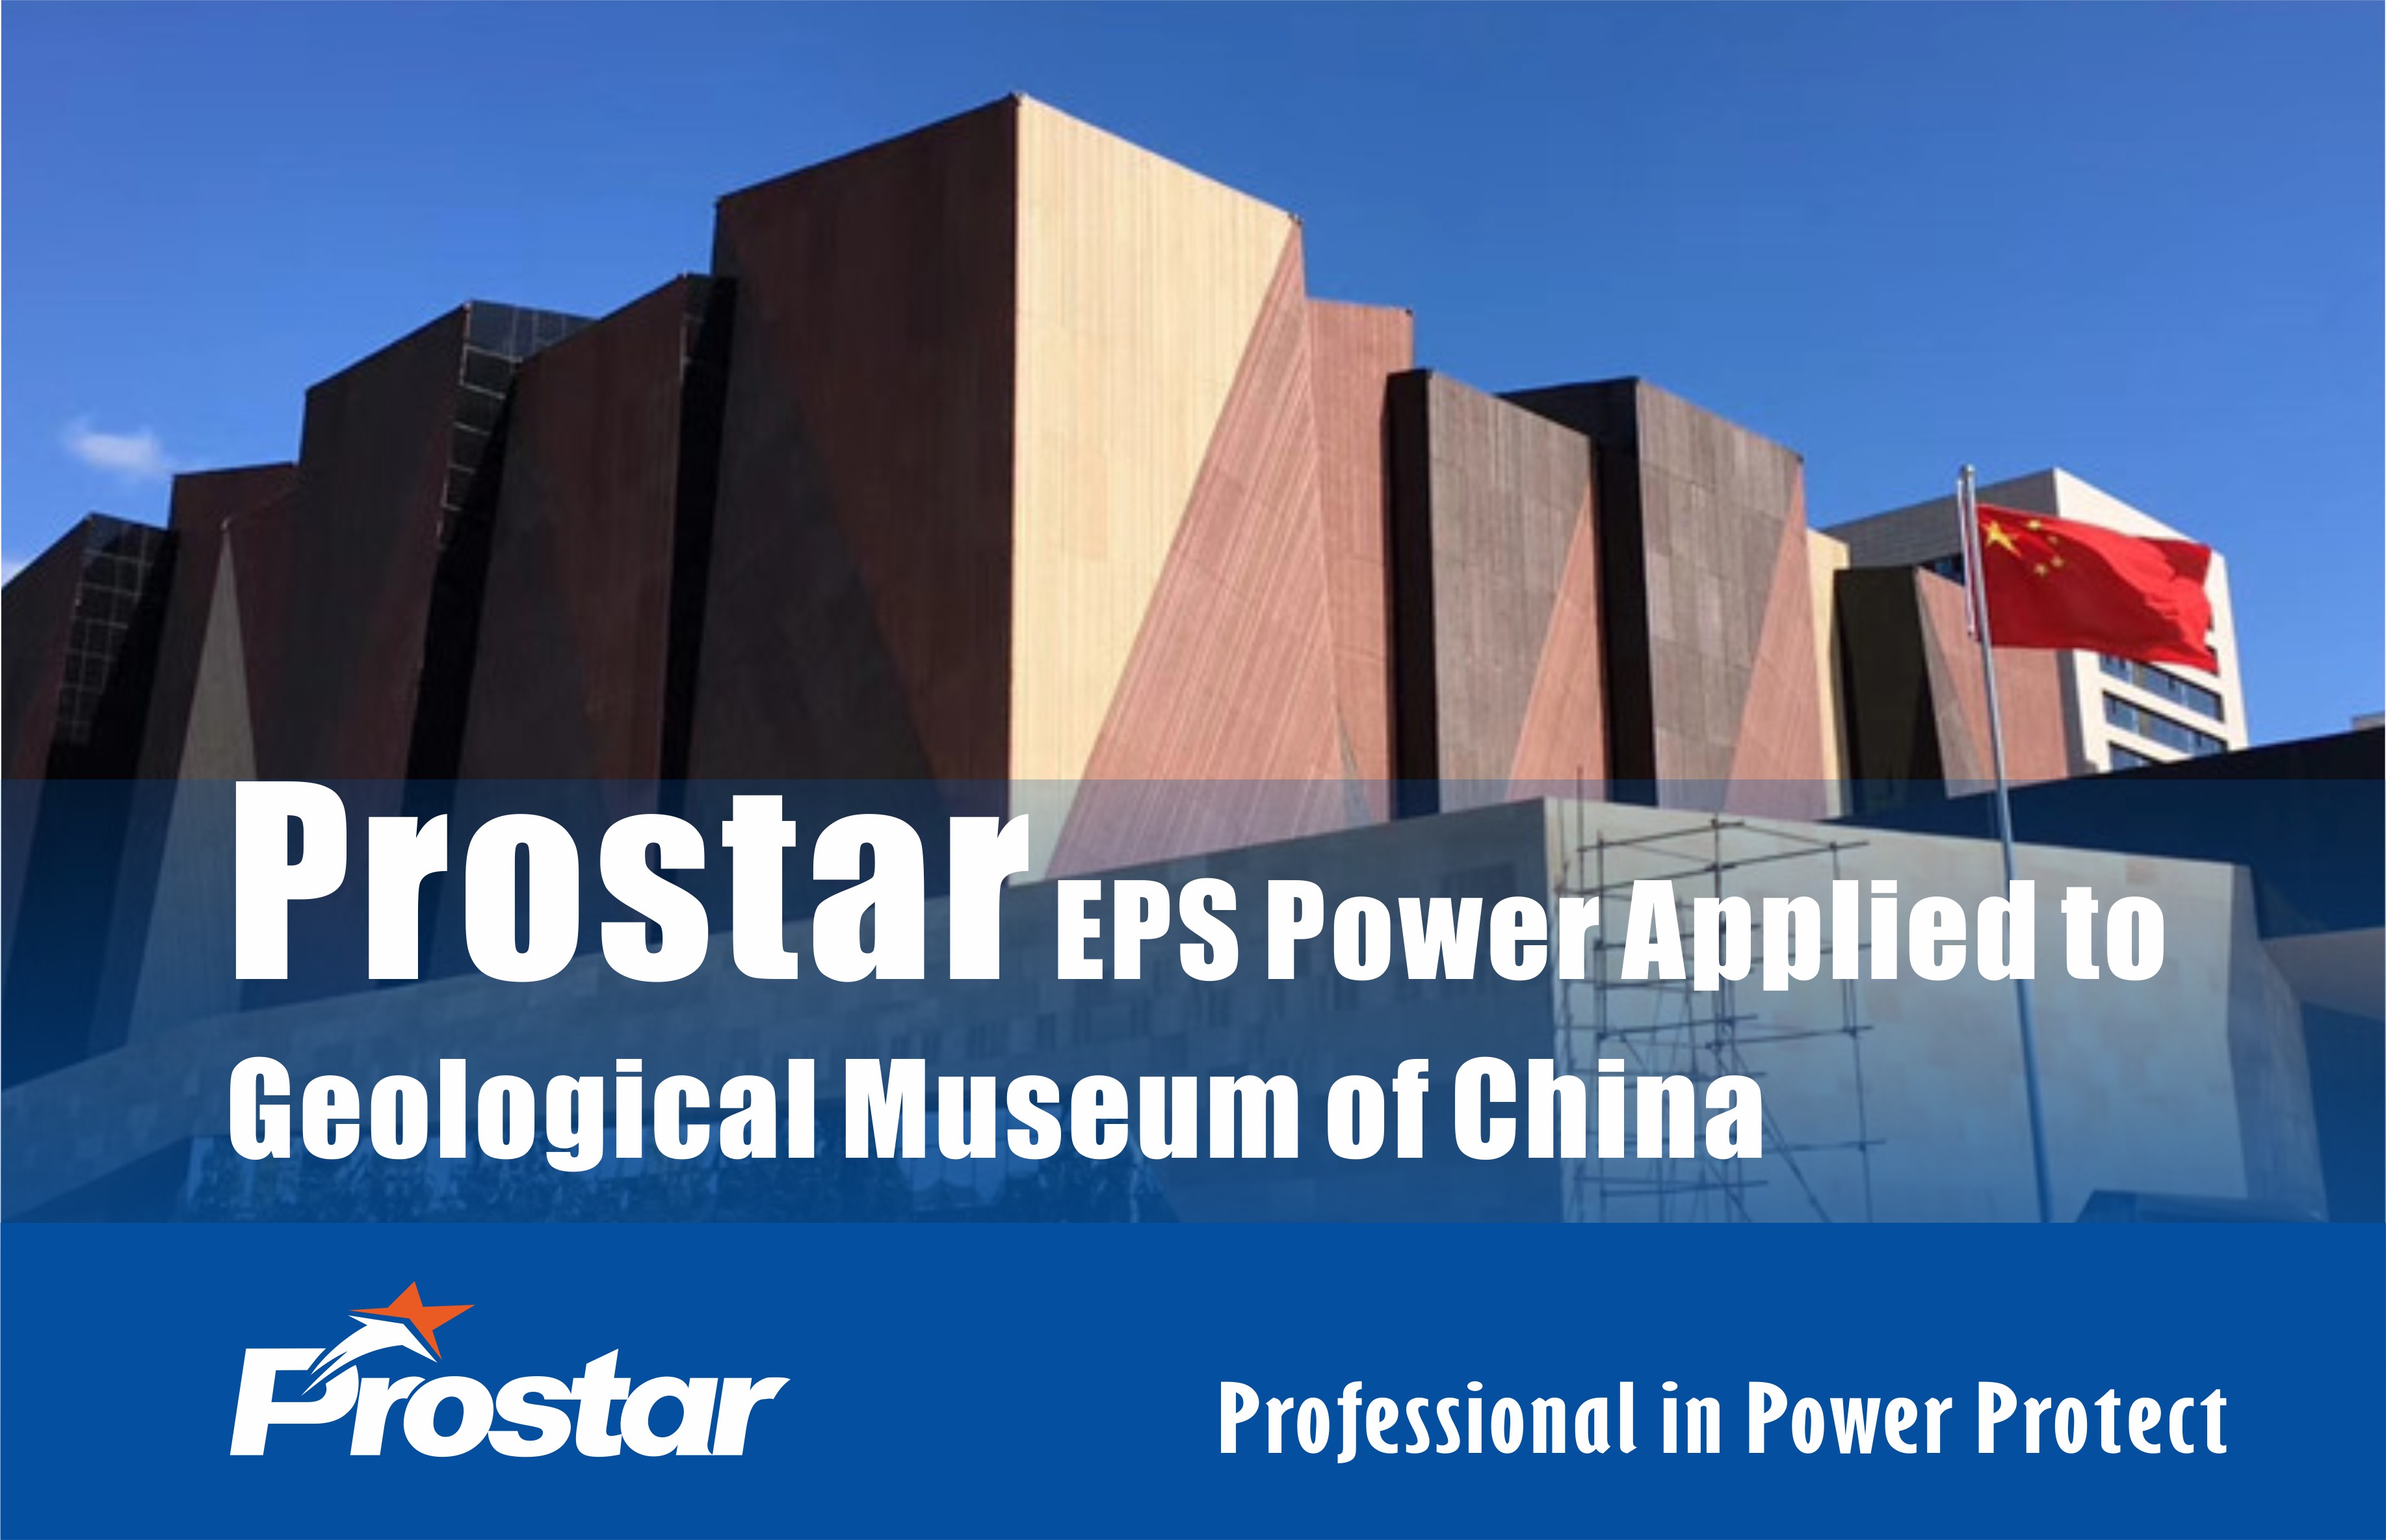 Prostar EPS Power Applied to Geological Museum of China